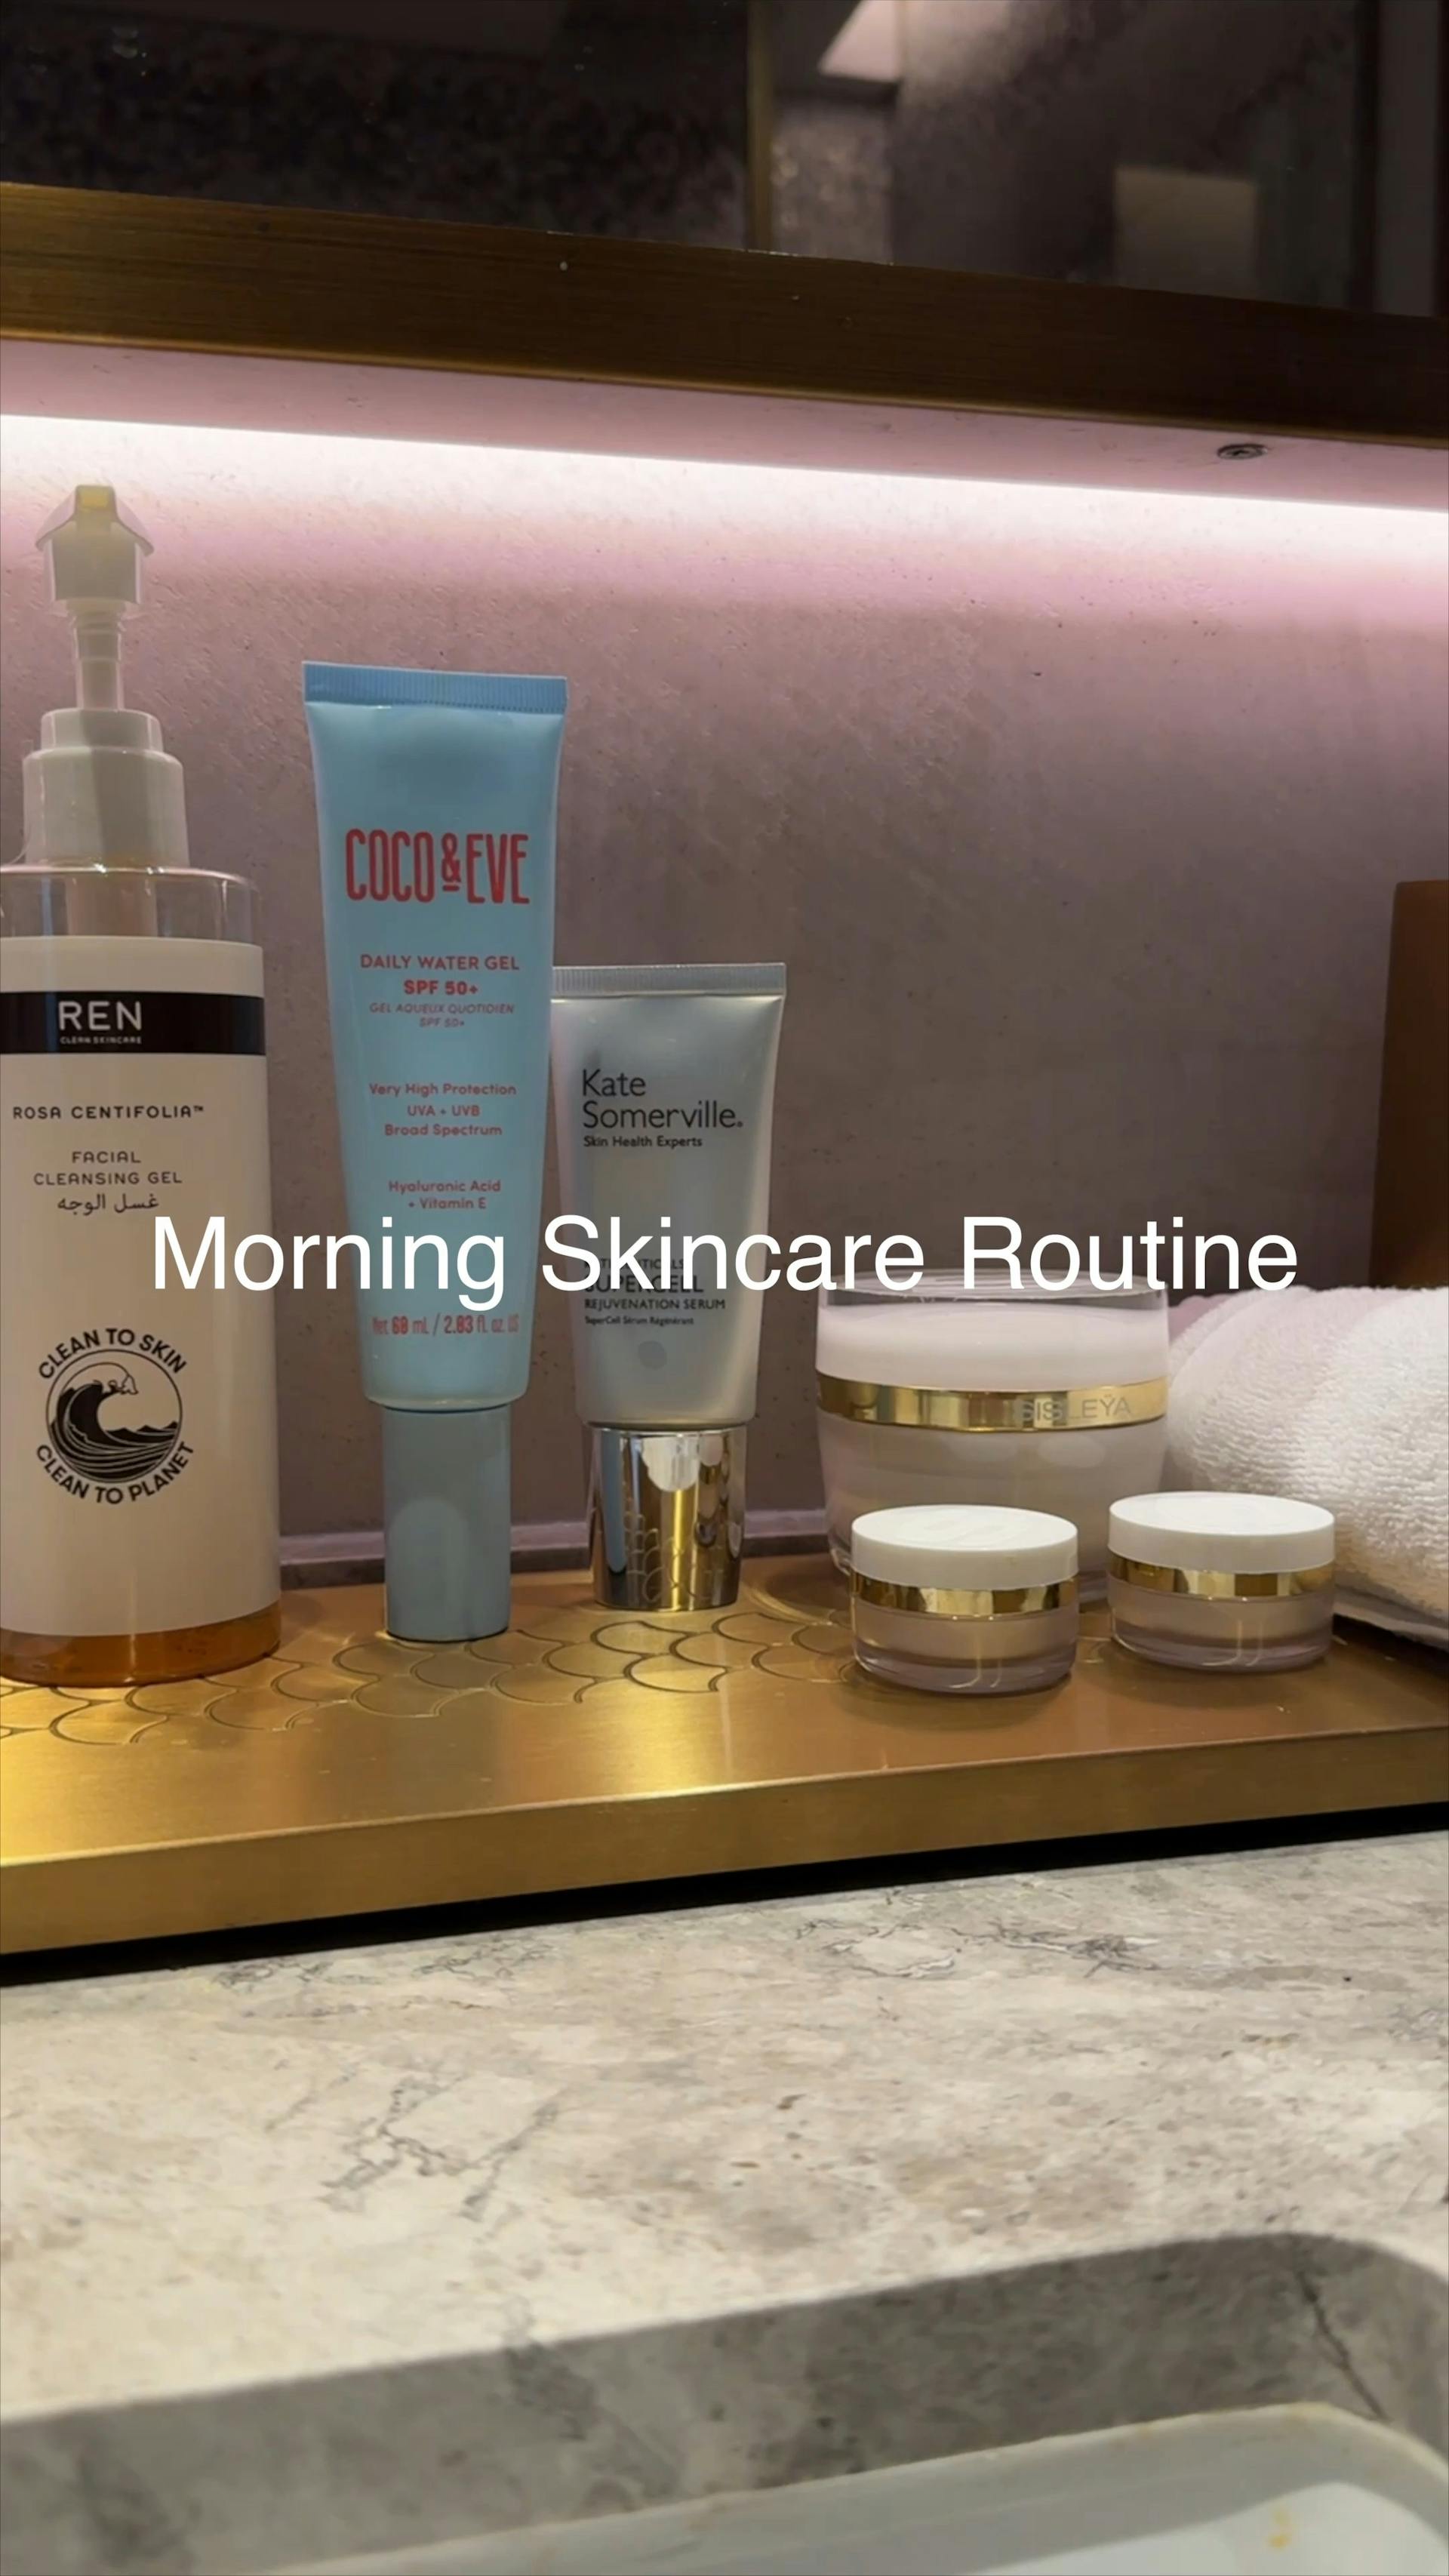 Morning skincare routine, Skincare, skincare products, Sisley gel cream, coco and Eve, SPF, Kate Somerville, morning routine